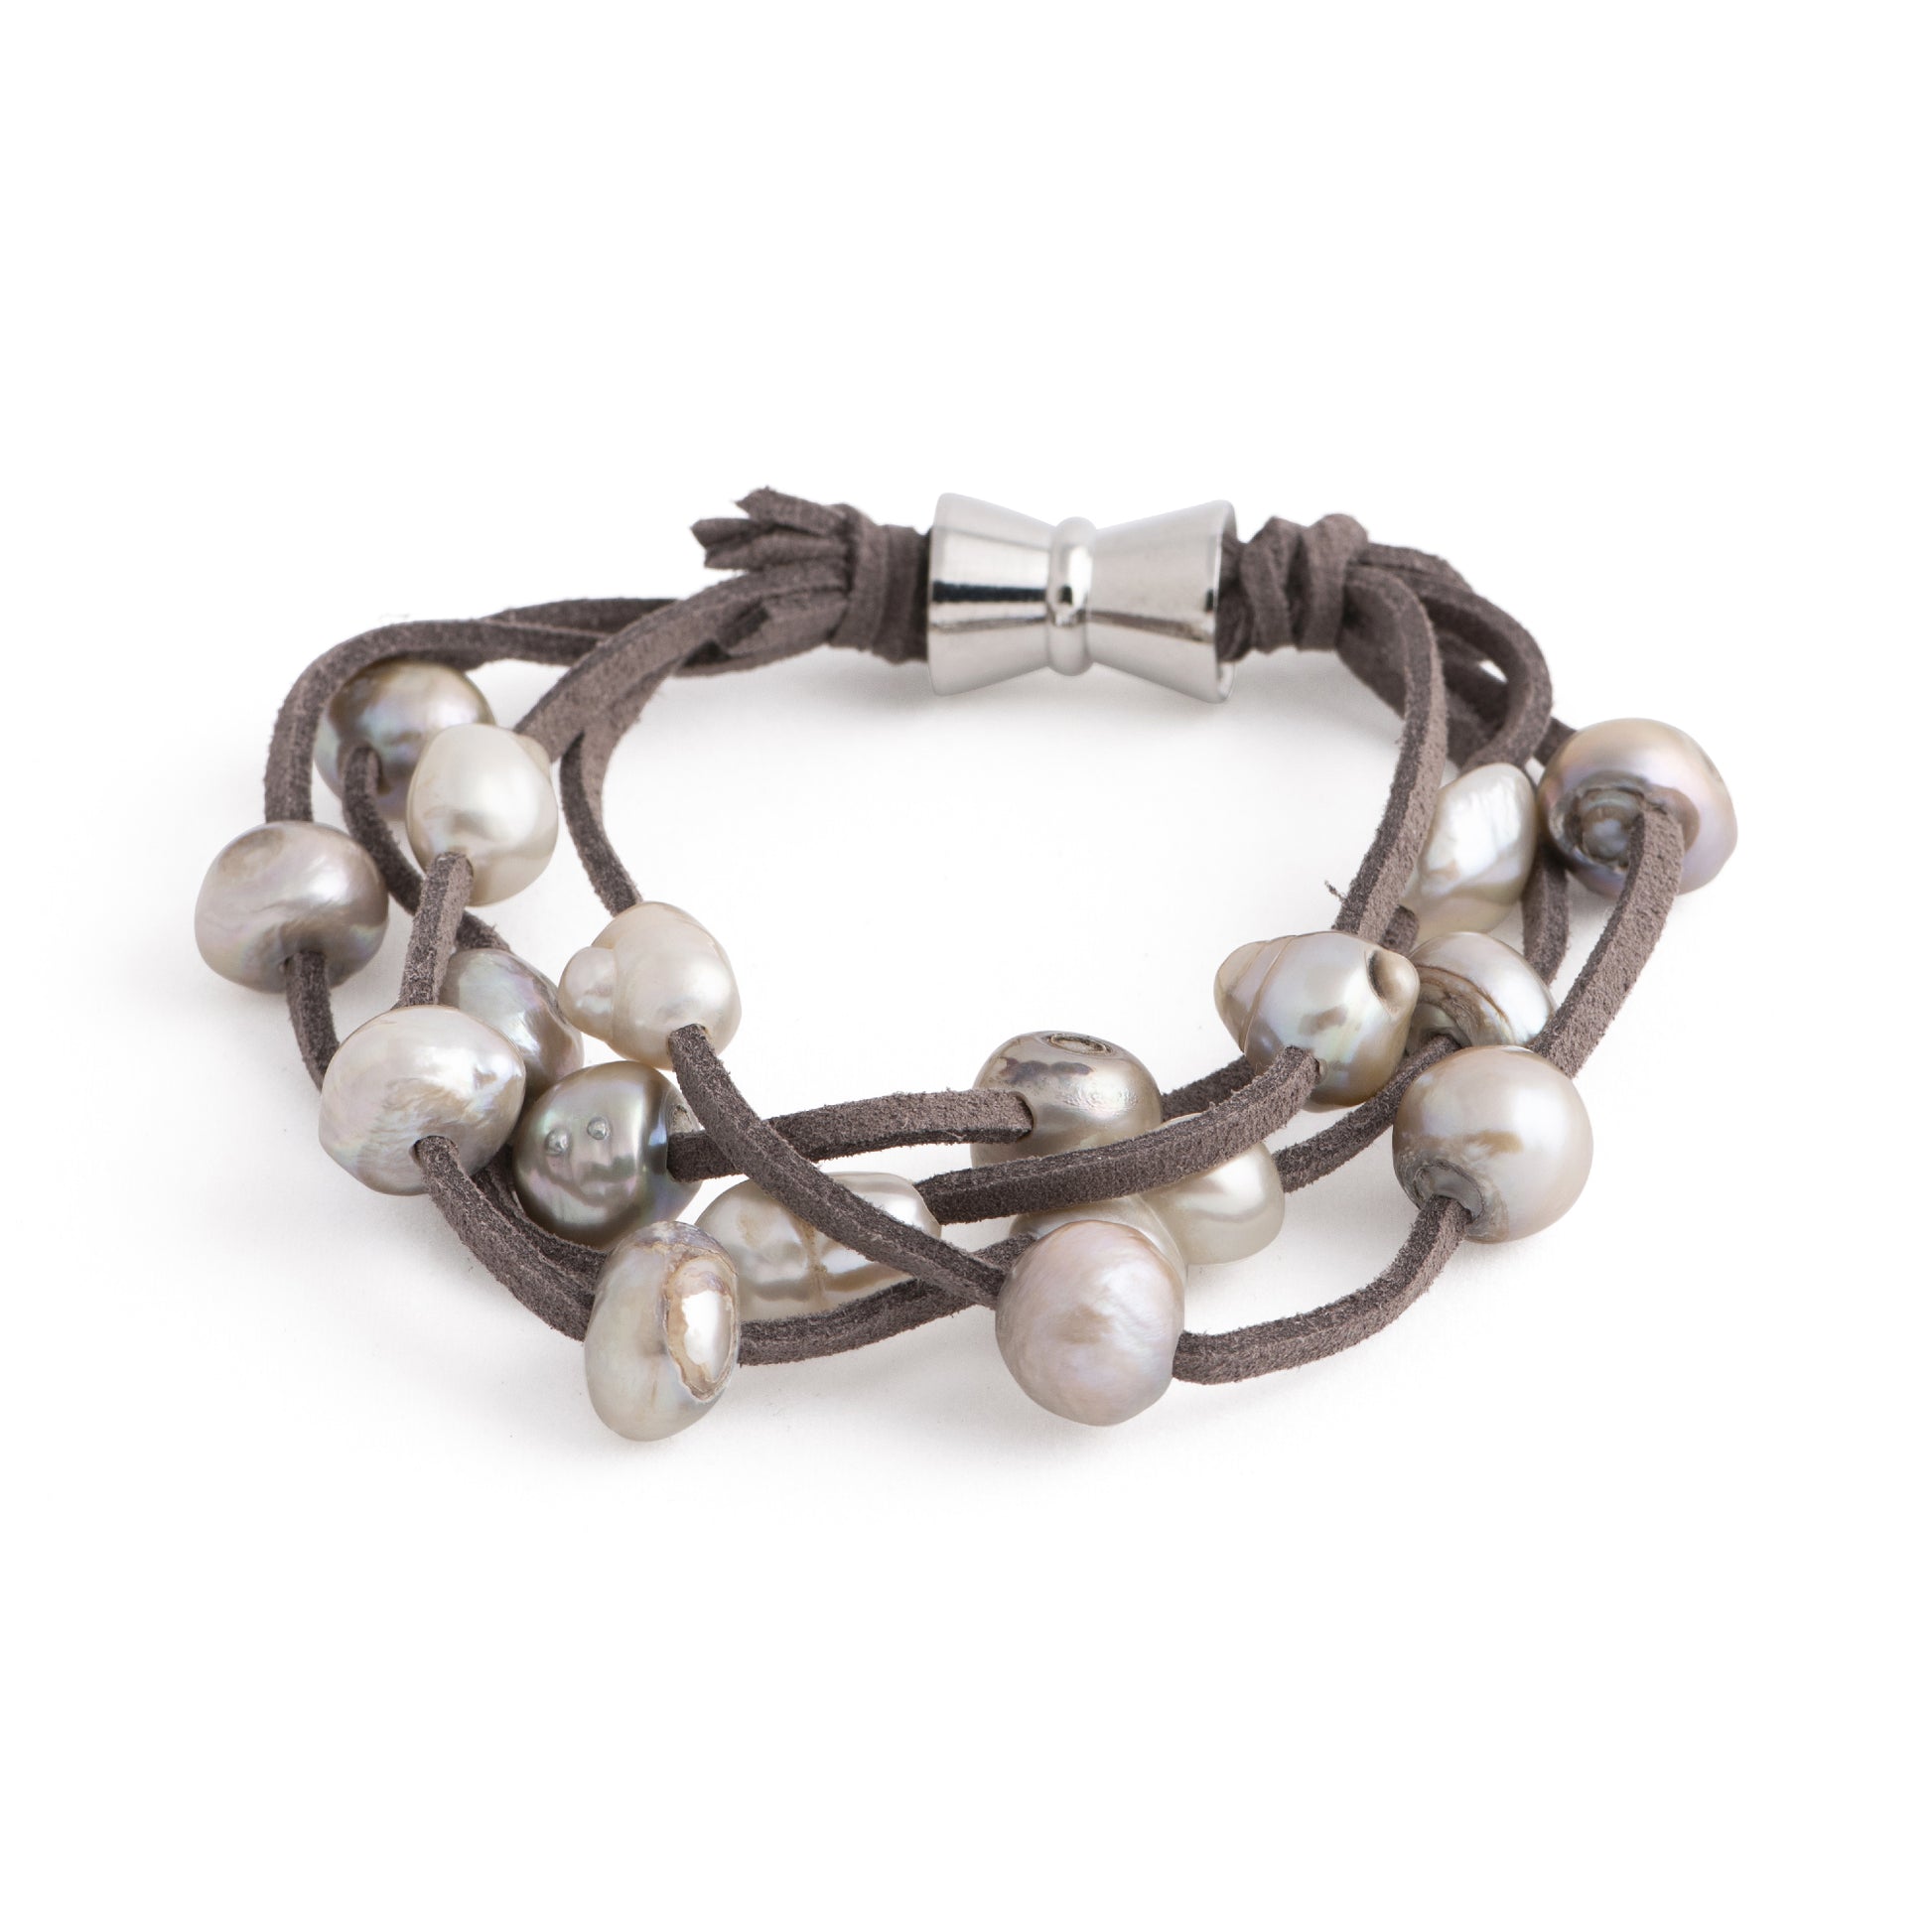 Bengal - Suede multi-layer bracelet with freshwater pearls and magnetic clasp (Dark grey suede, silver pearls)